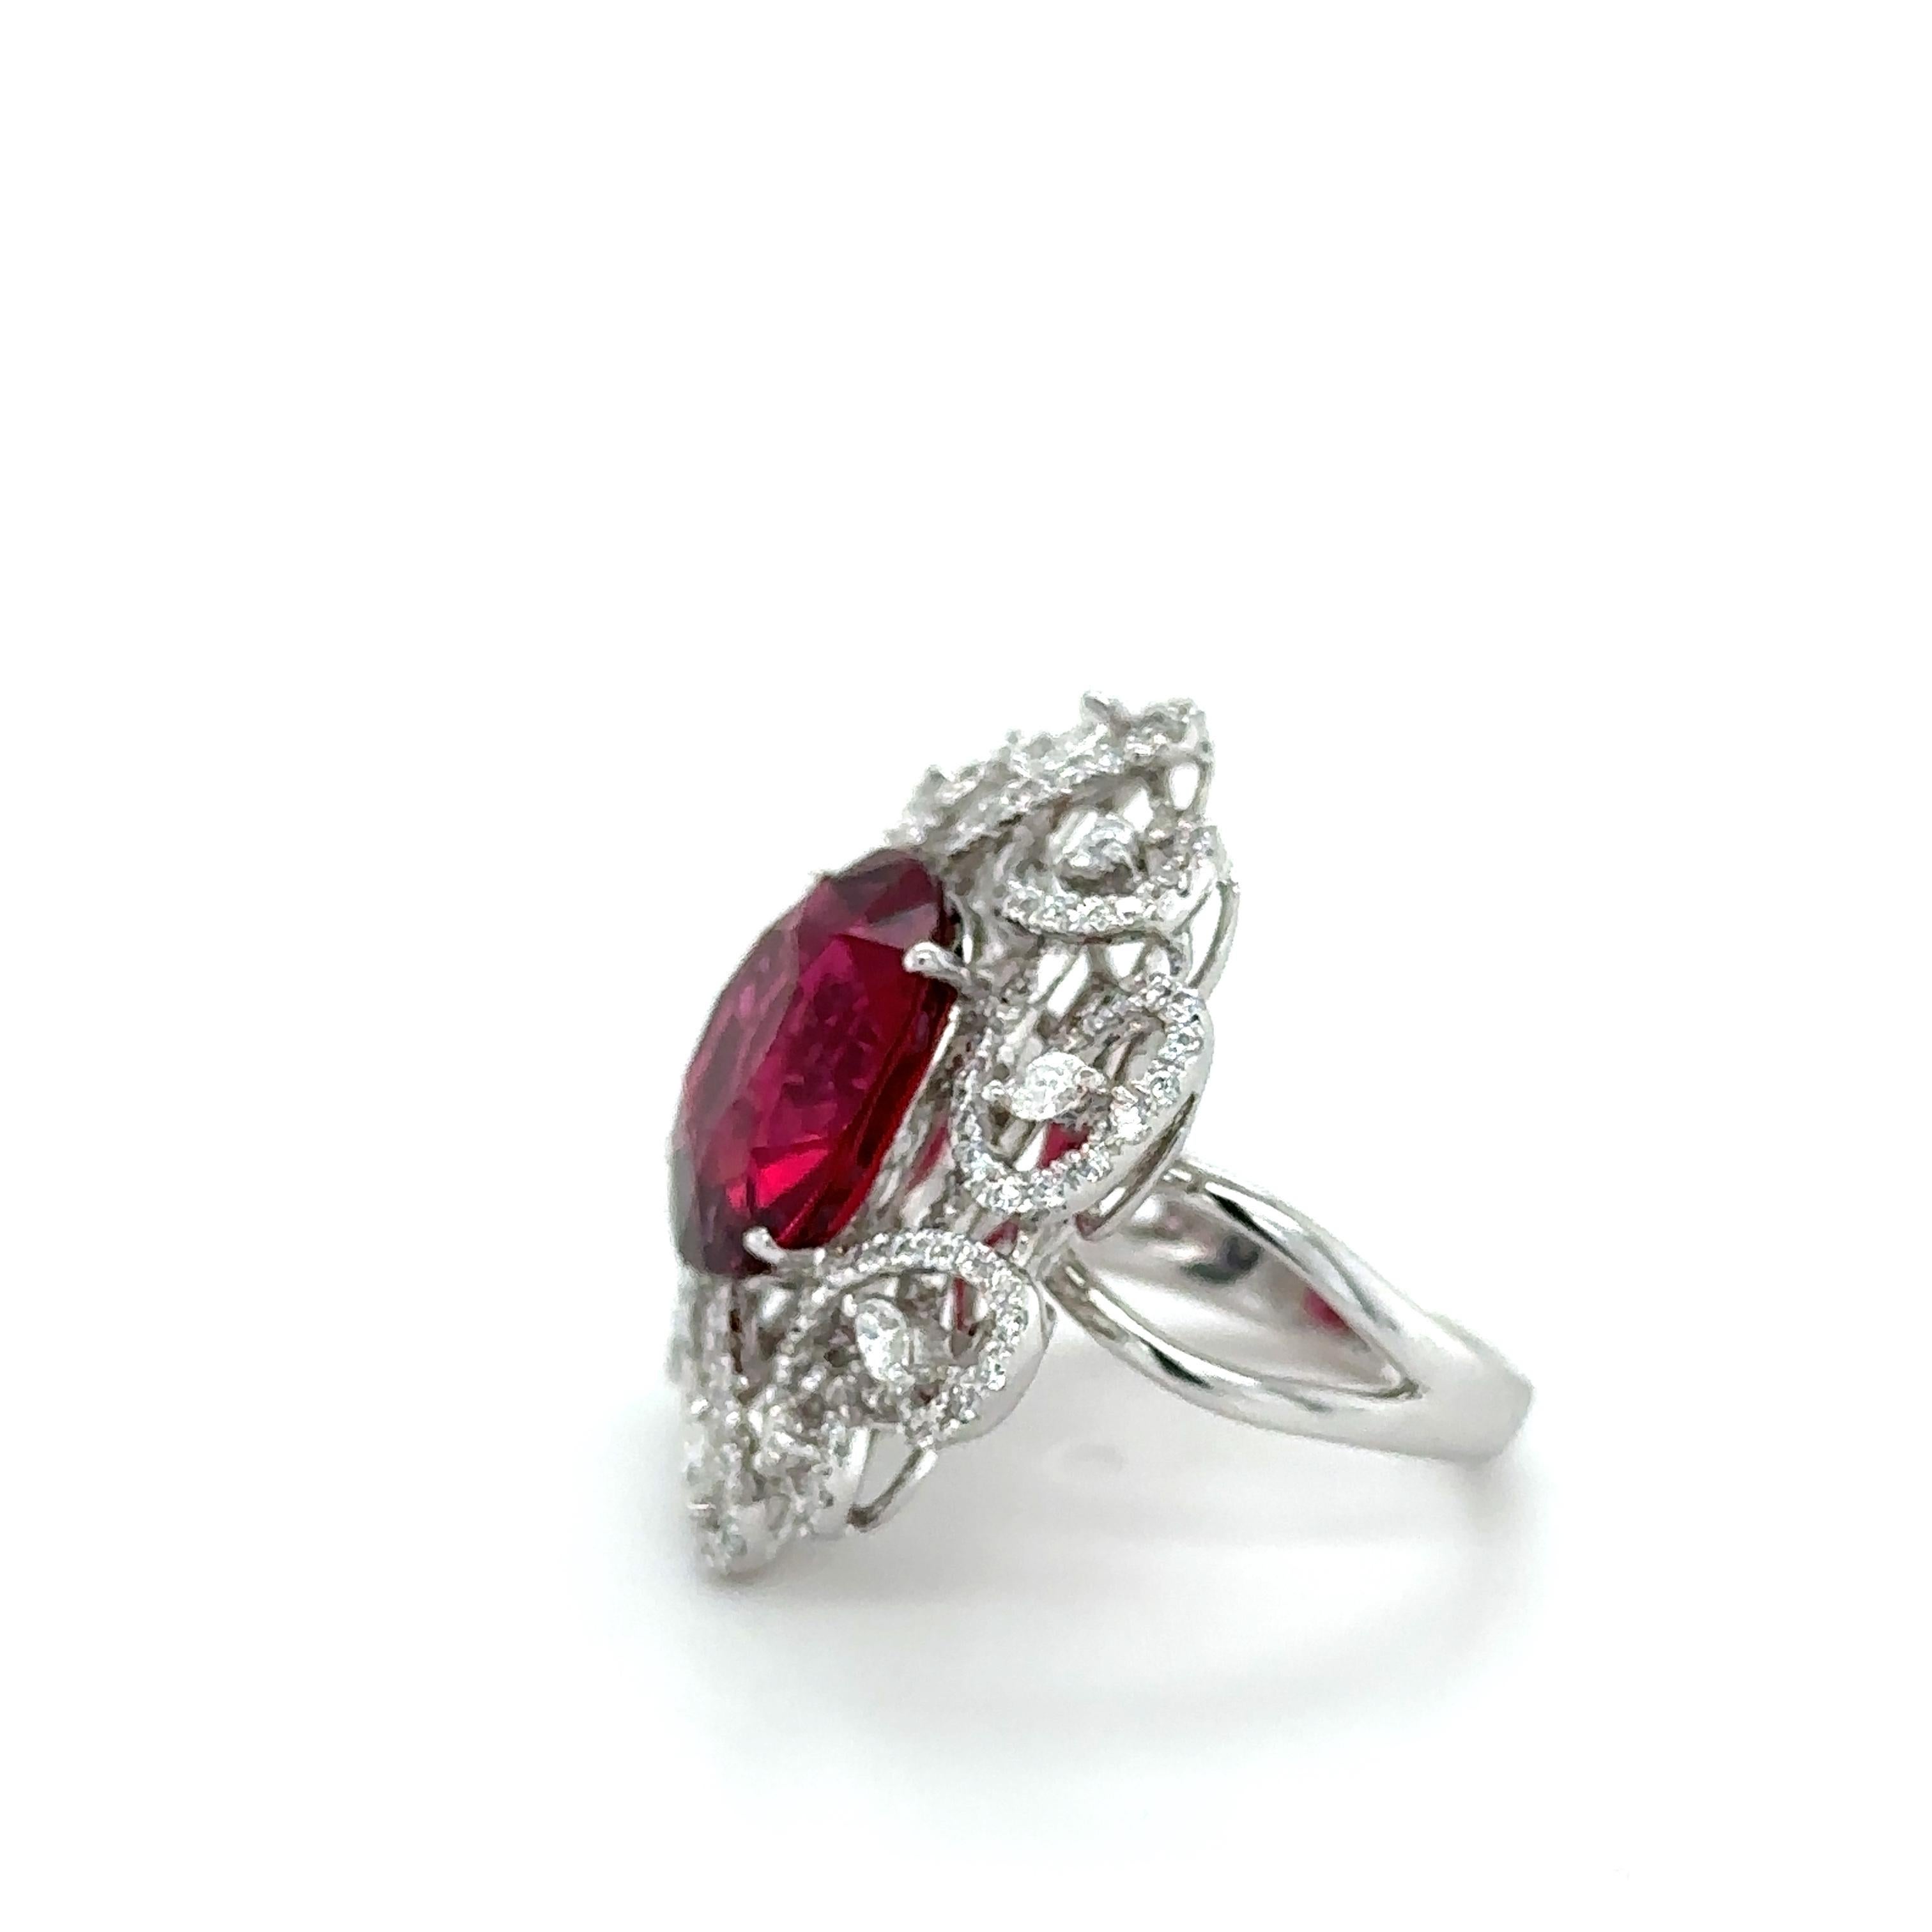 This stunning rubelite diamond ring is a true masterpiece, crafted to create a breathtakingly beautiful piece of jewelry that is as unique as it is elegant. The centerpiece of this ring is an exquisite 7.37ct rubelite, a perfect shade of vivid